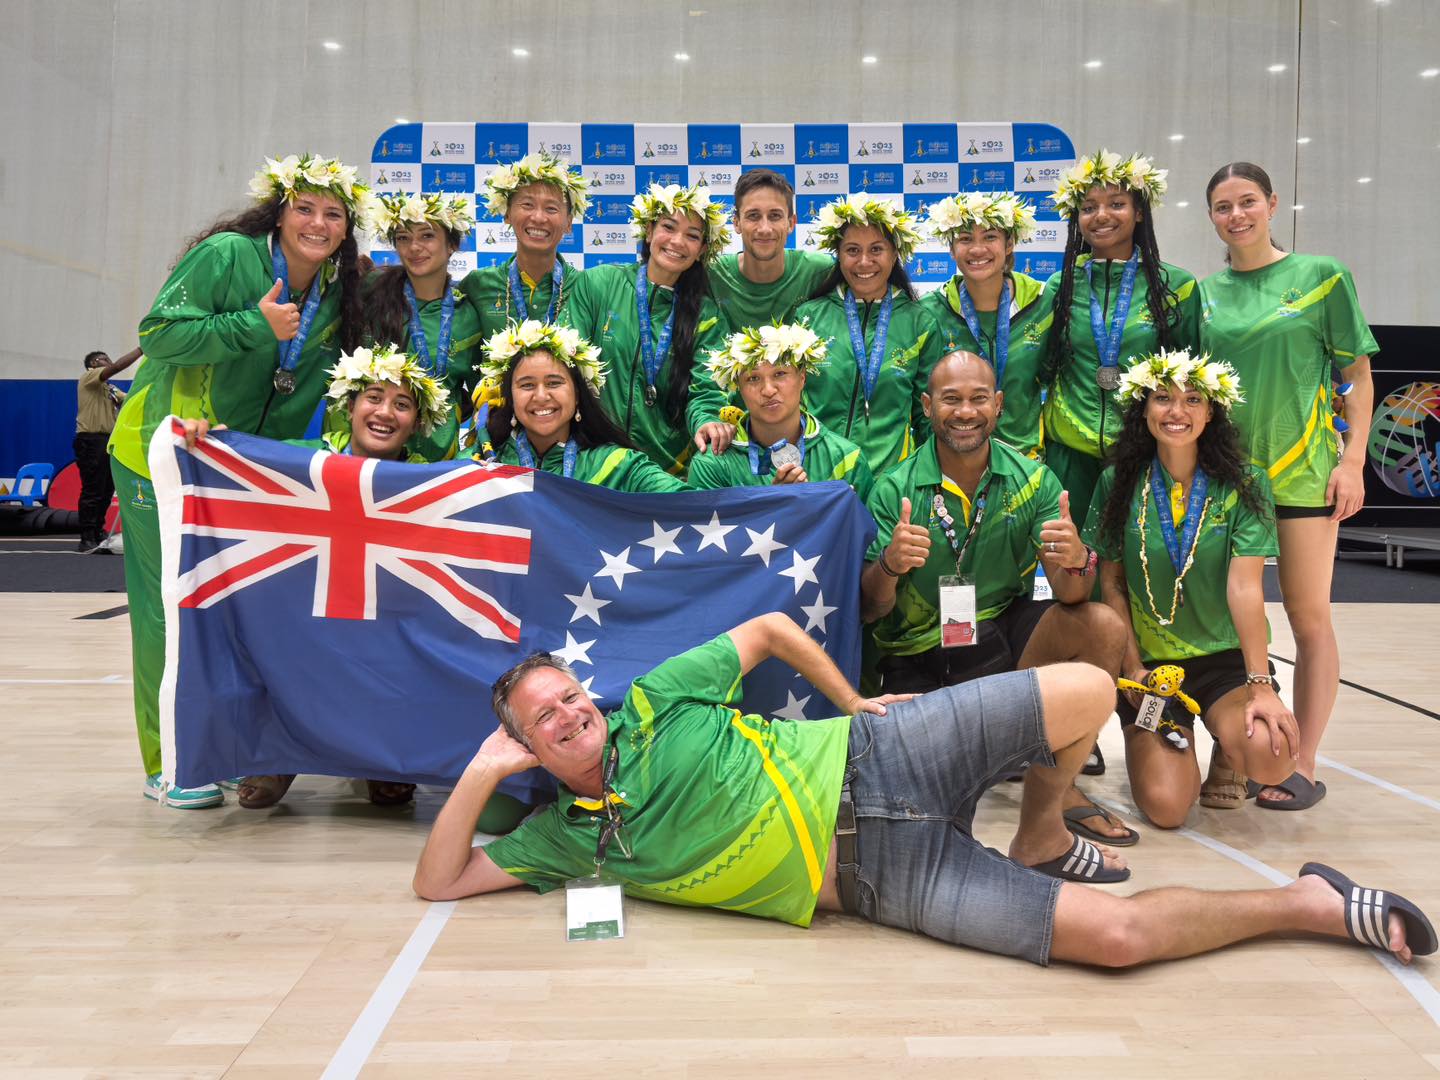 Pride and podiums: CISNOC applauds athletes for Pacific Games performance